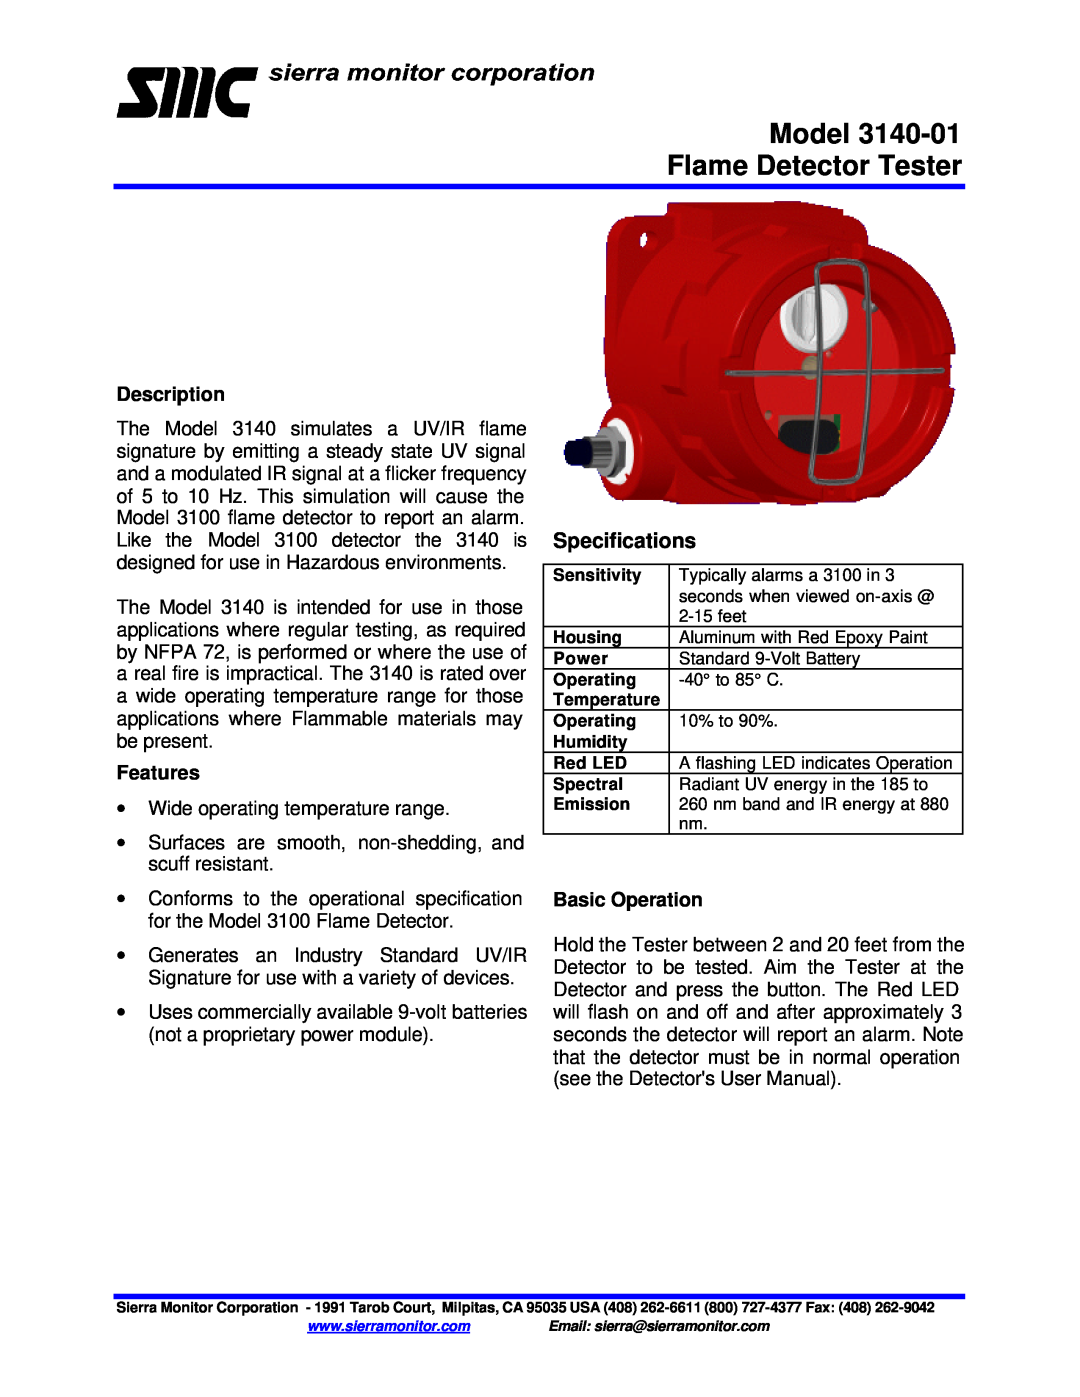 Sierra Monitor Corporation specifications Model 3140-01Flame Detector Tester, Specifications, Description, Features 